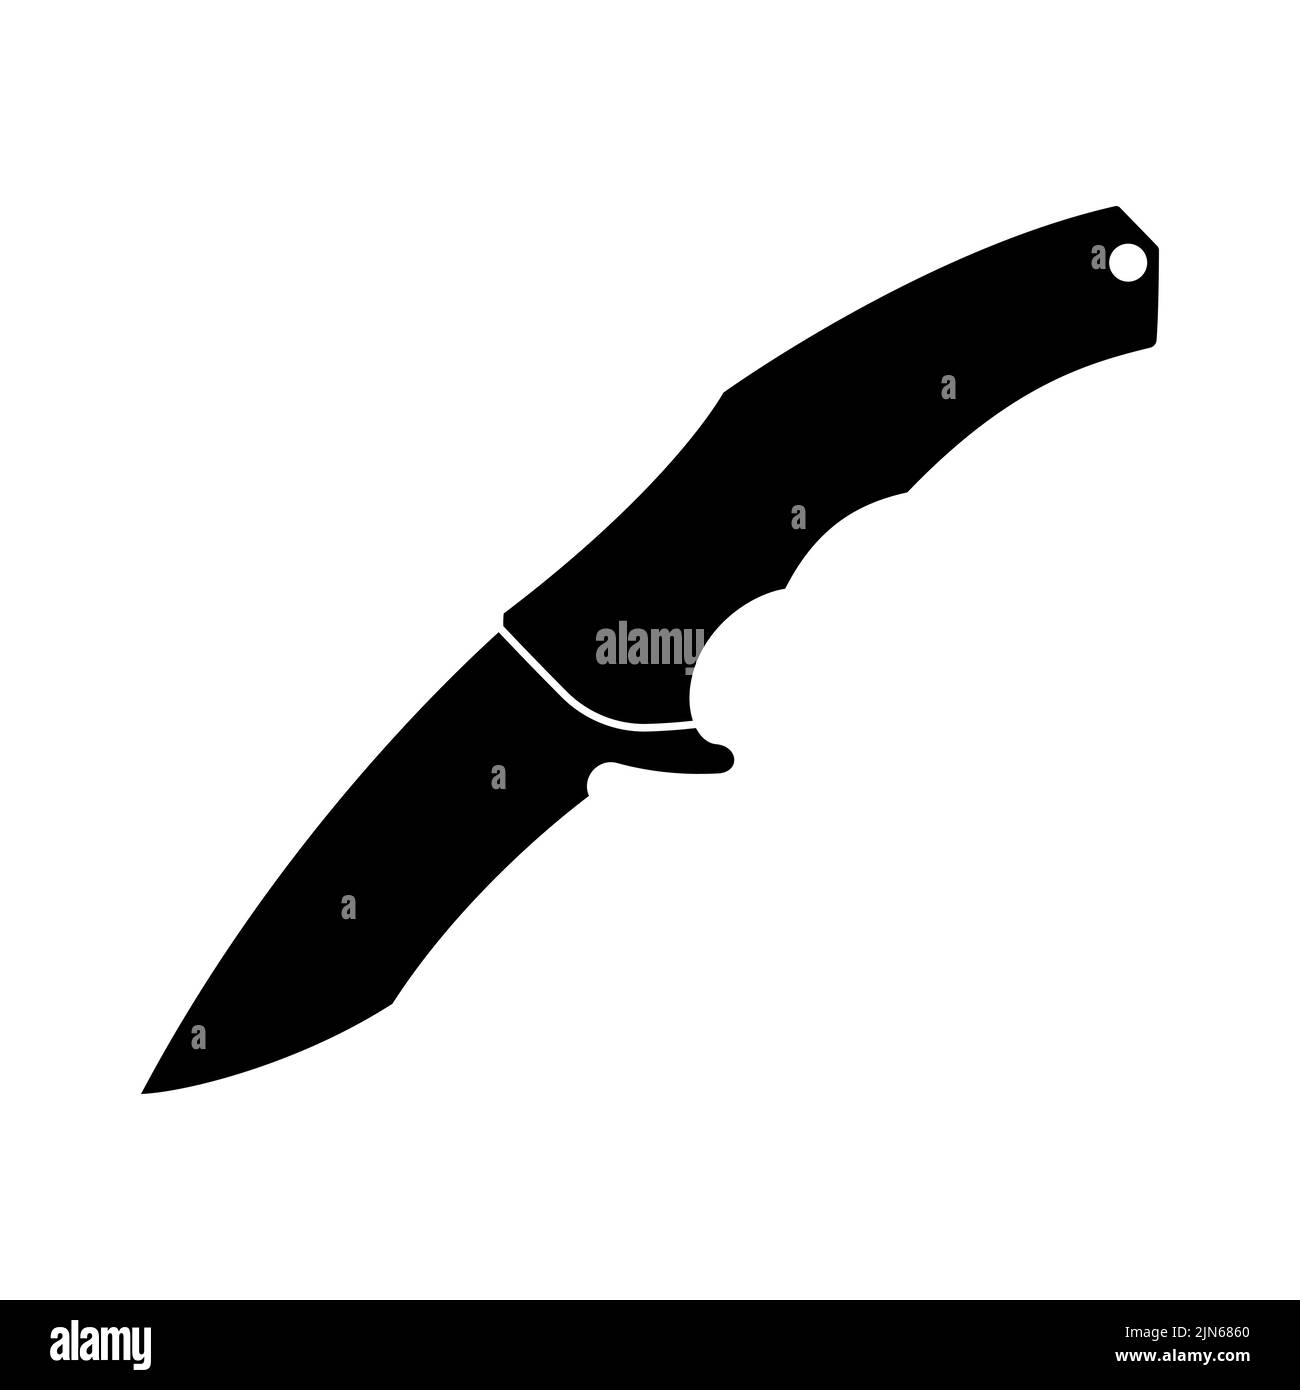 Knife icon. Black knife icon. Isolated knife symbol. Vector illustration. Stock Vector